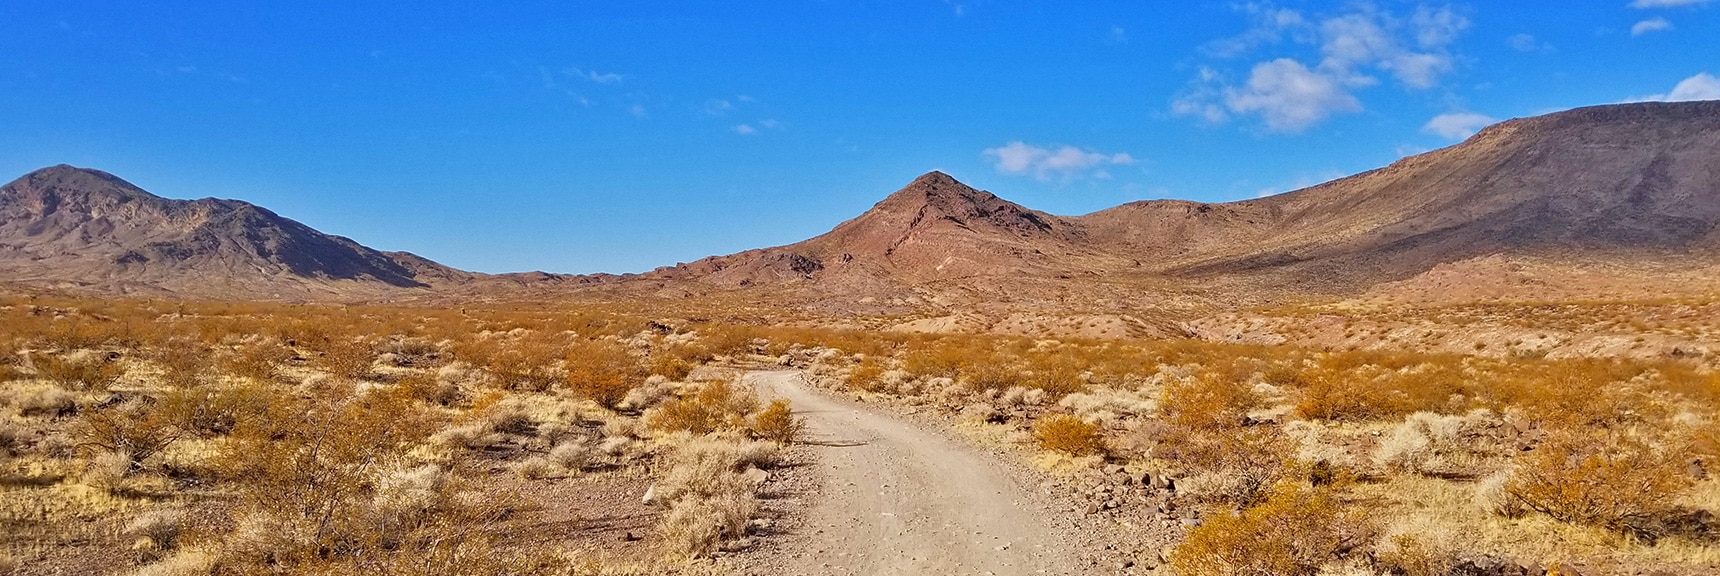 Continuing Beyond the Mile 1 Marker. Smaller Trails Branch Off to Most High Points | McCullough Hills Trail in Sloan Canyon National Conservation Area, Nevada